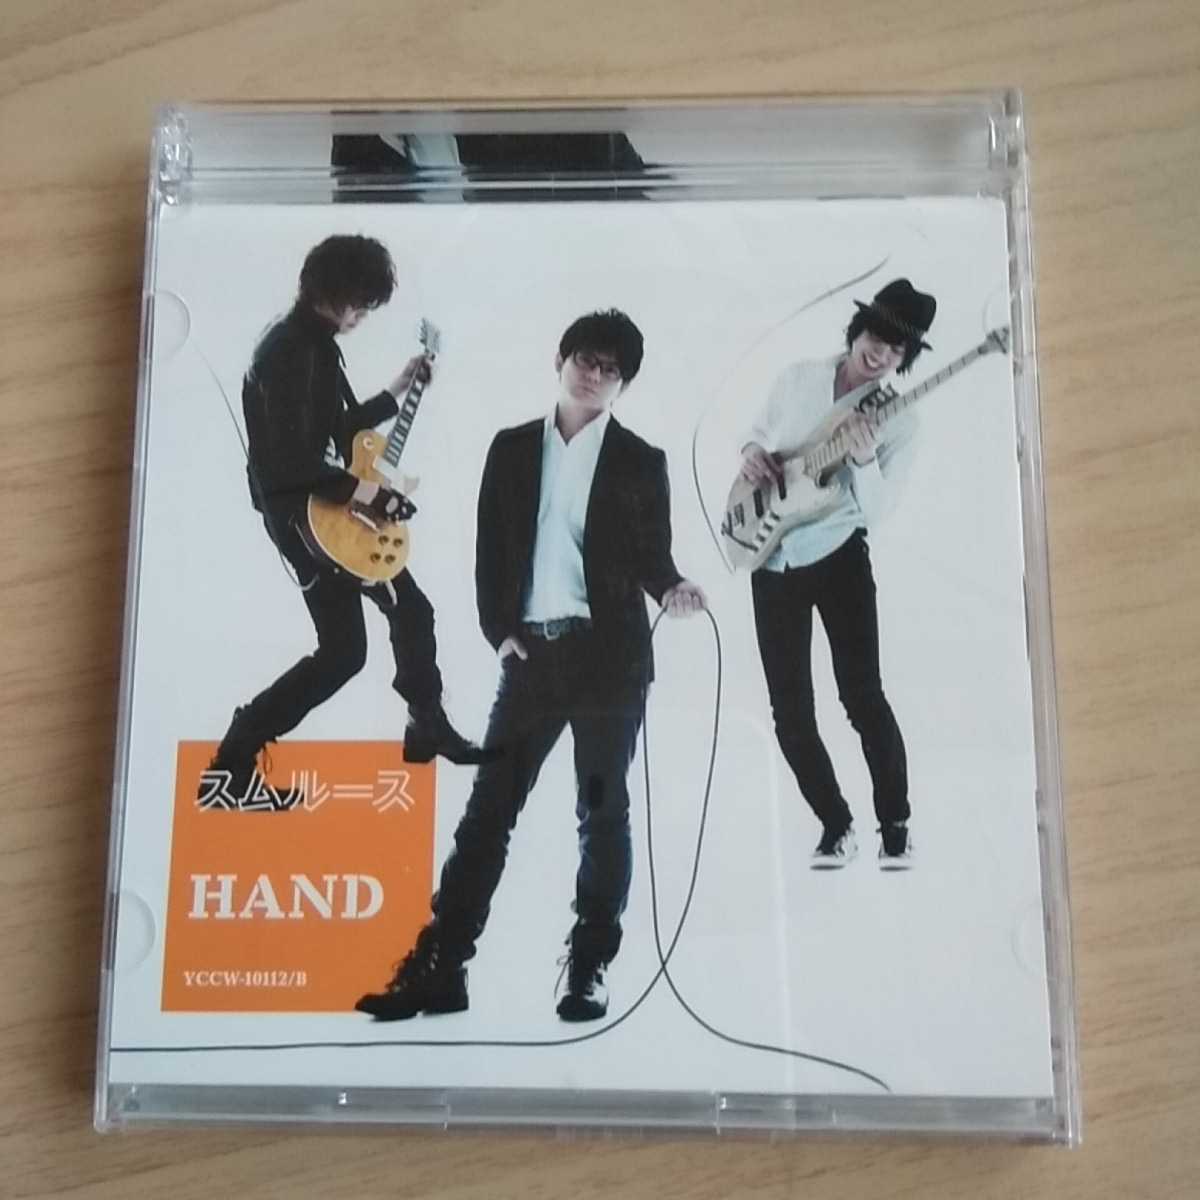 T082　CD＋DVD　スムルース　HAND　CD　１．CLAP YOUR HANDS　２．Beat　３．体感幸福論　４．殺風景_画像3